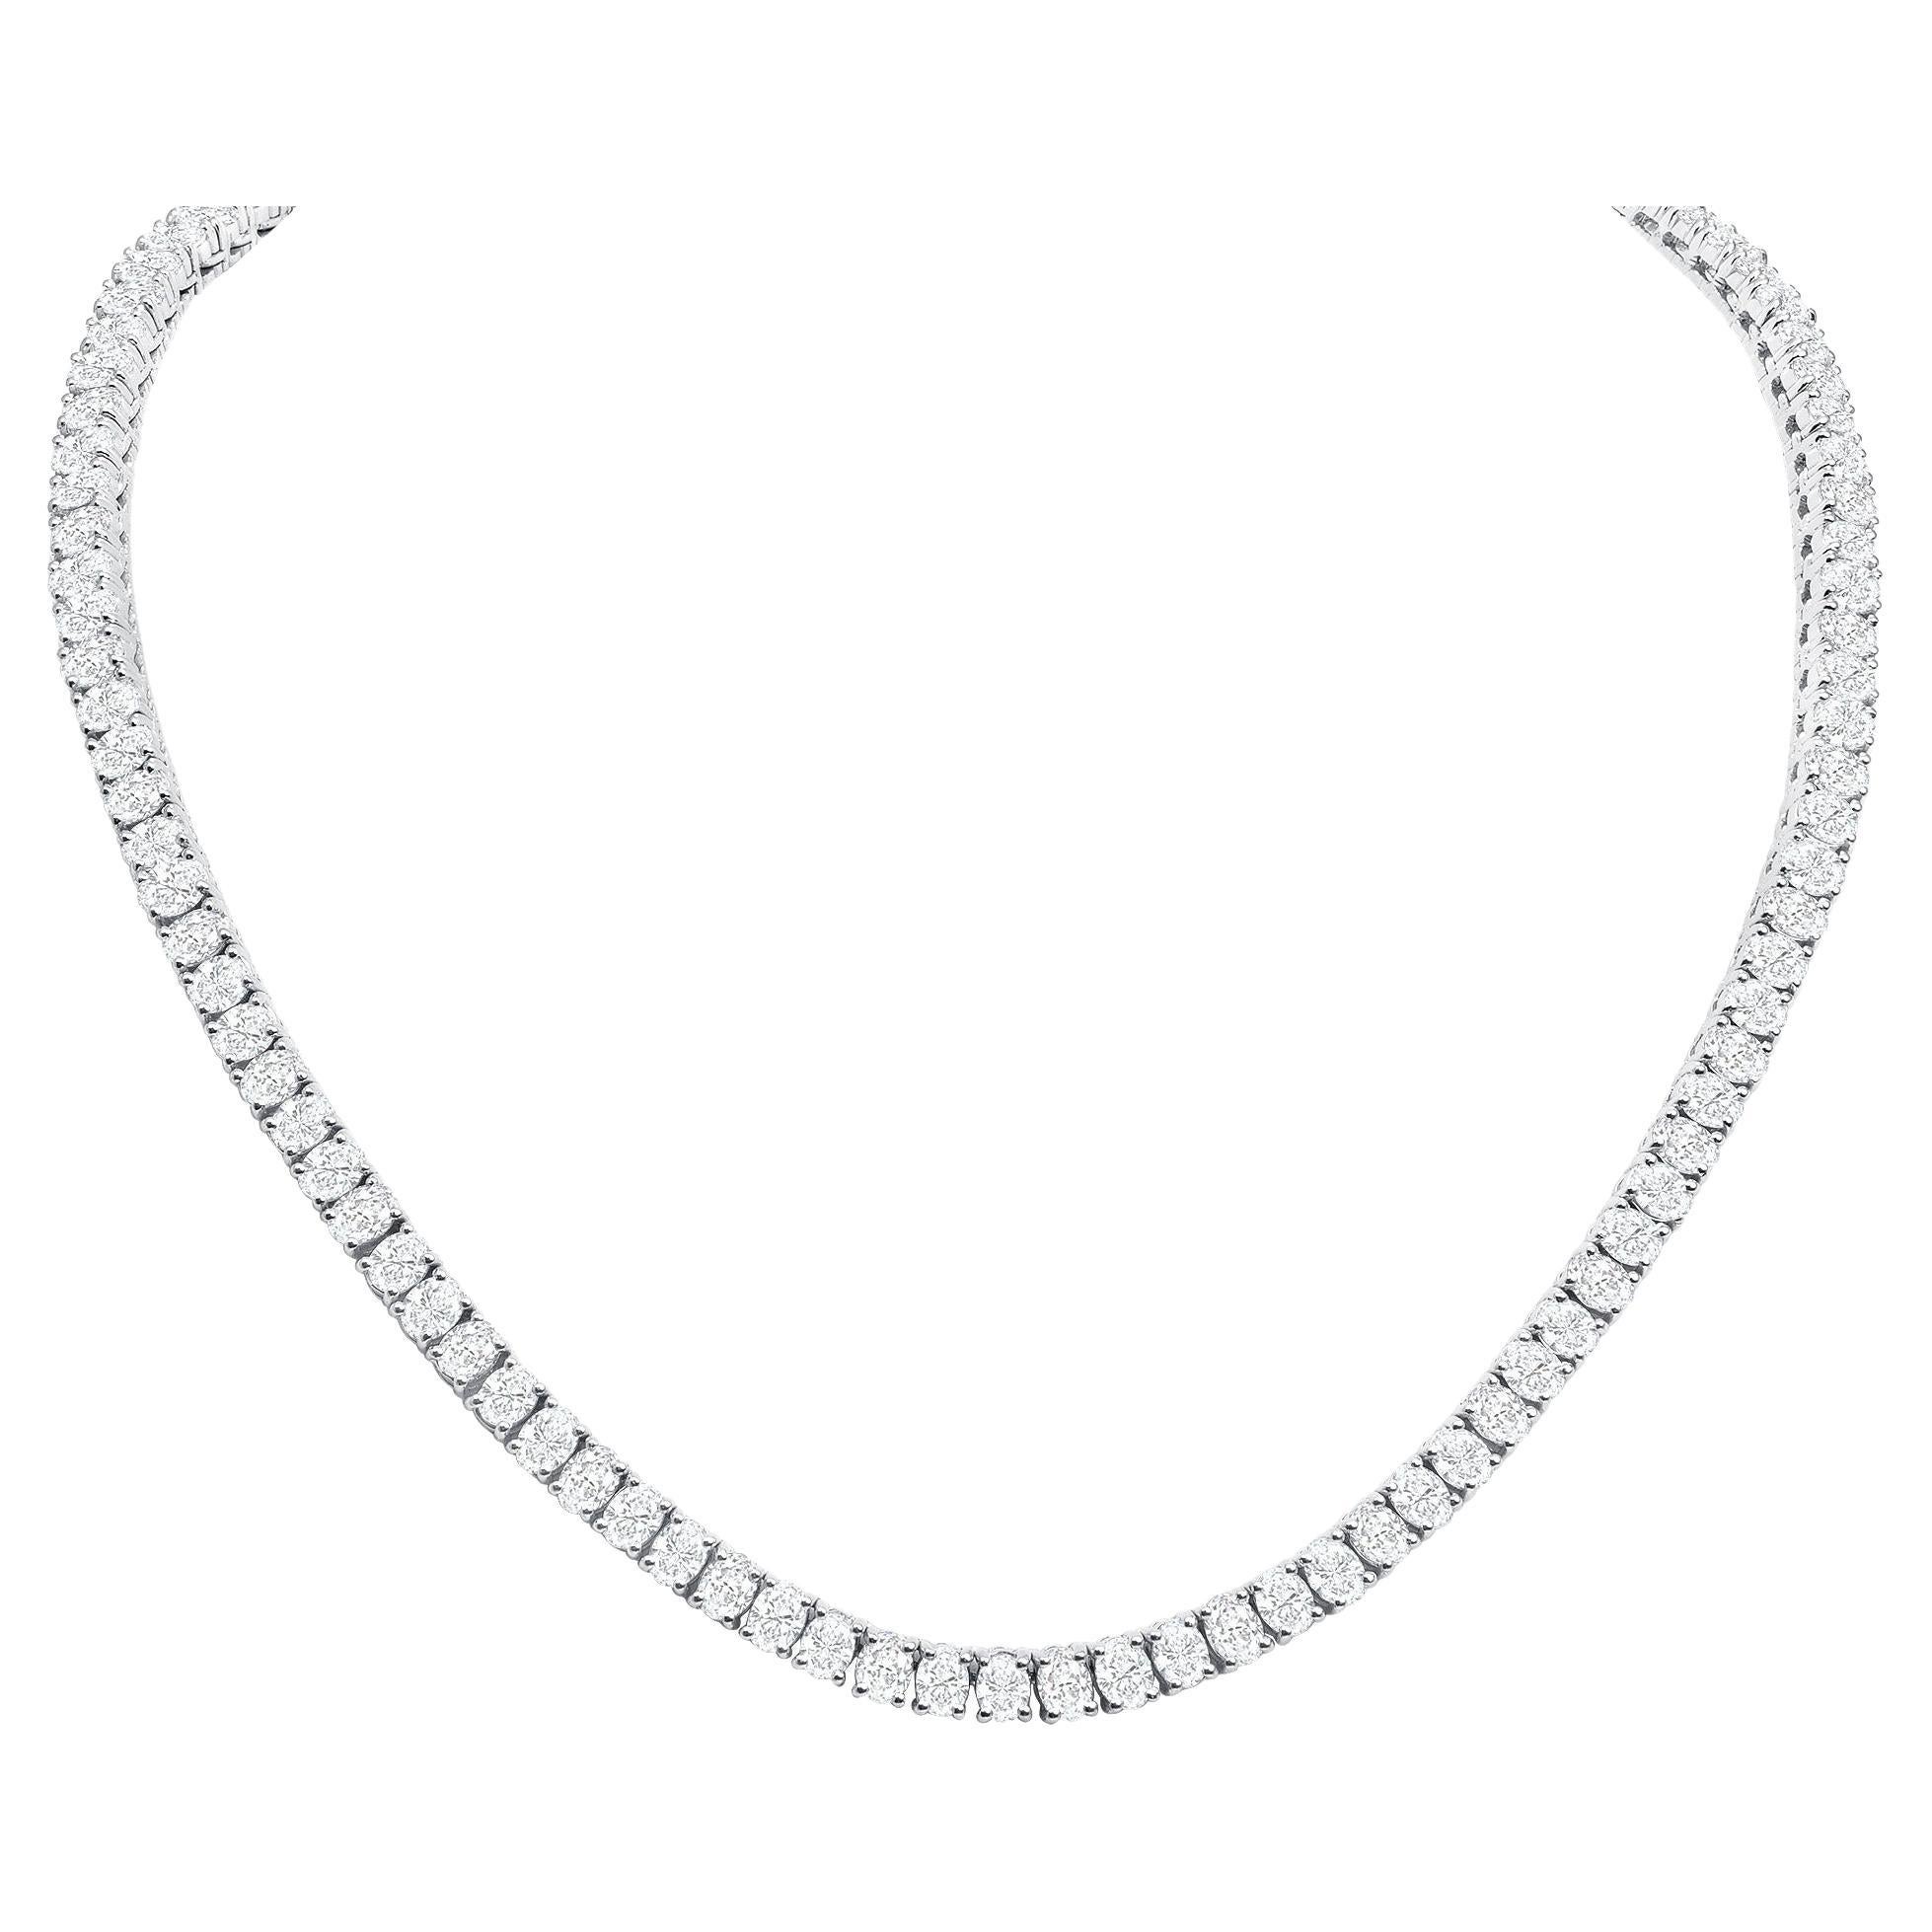 20ct Oval Tennis Necklace, Natural Diamonds (F-G, VS-SI1) in 22 Inches 18k Gold For Sale